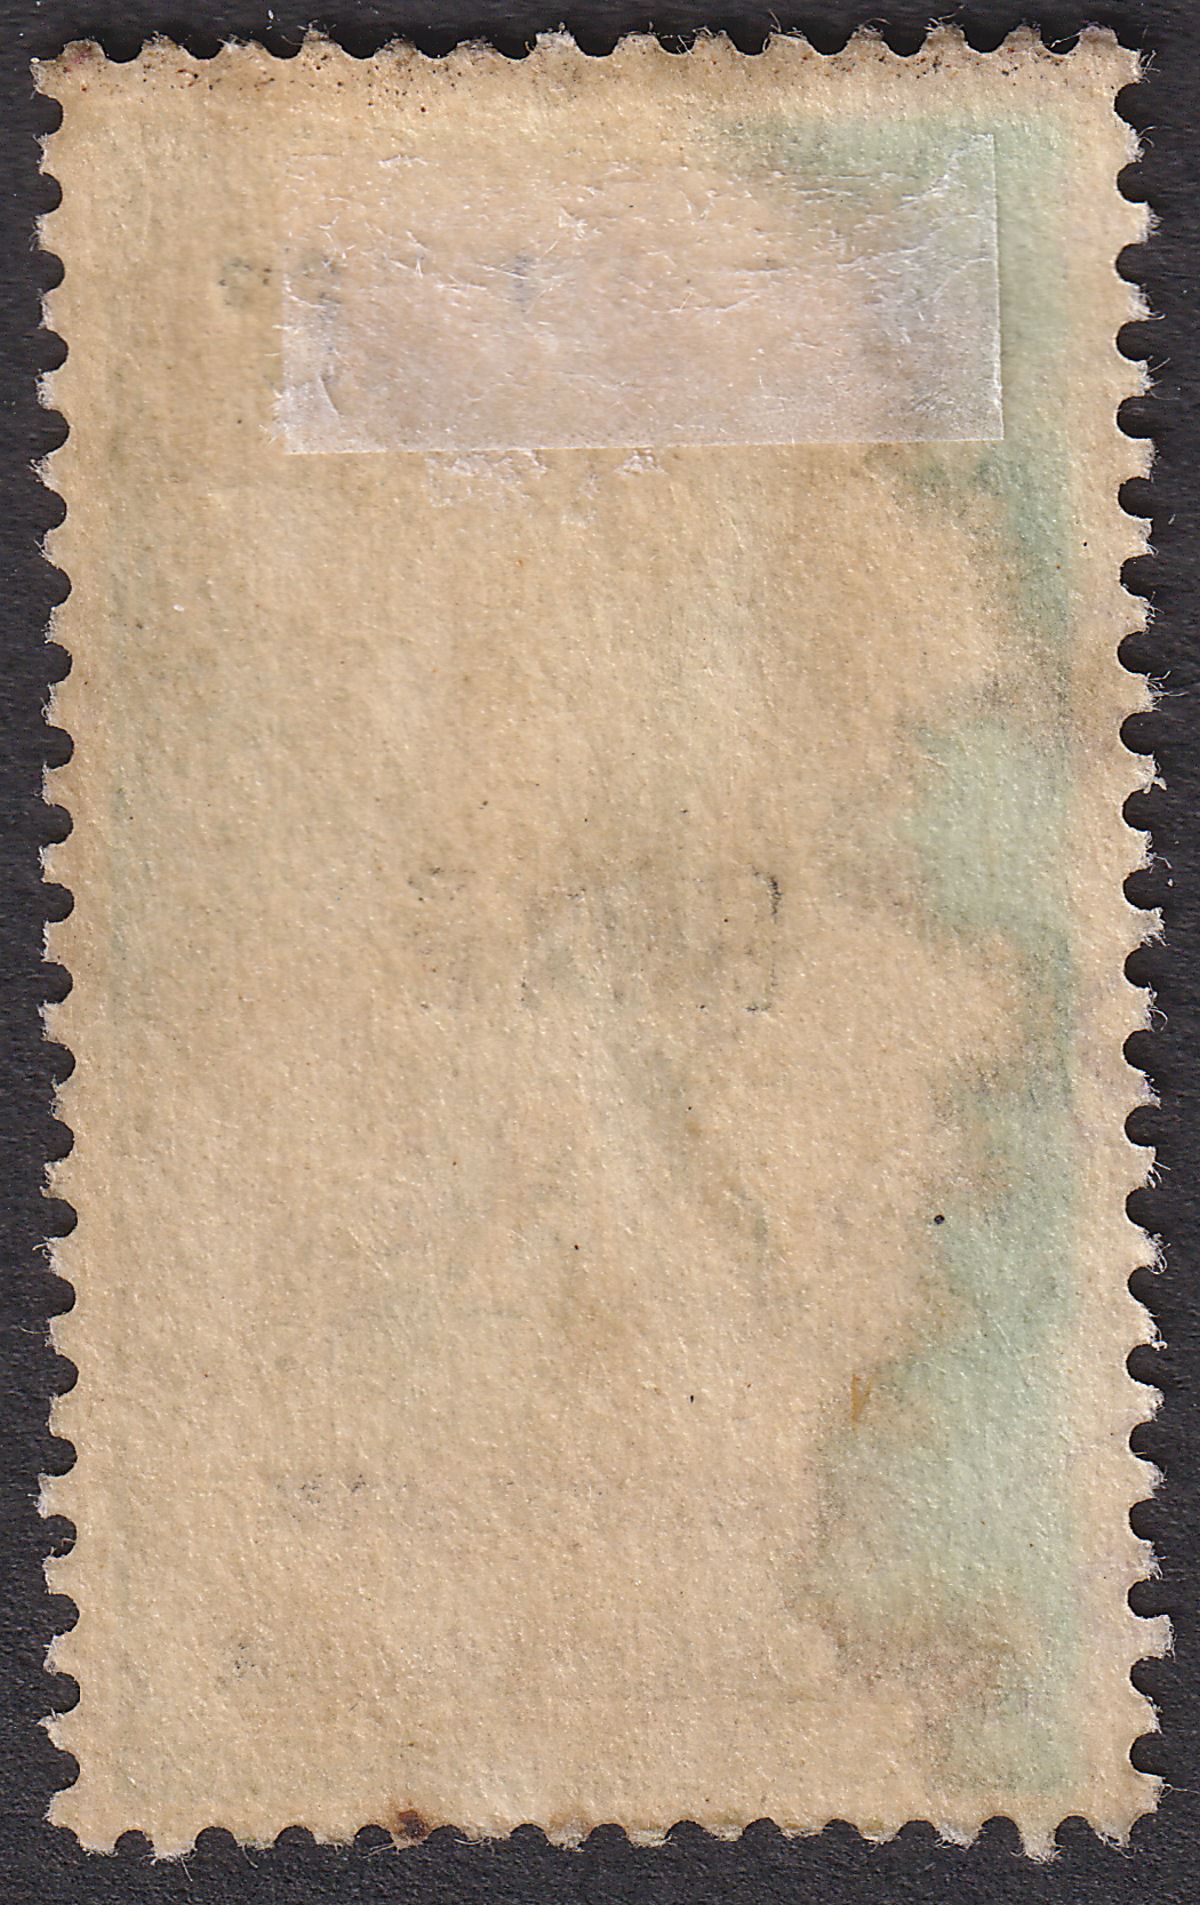 India 1910 KEVII Revenue Brokers' Note Provisional Opt 8a Green + Brown Used BF2